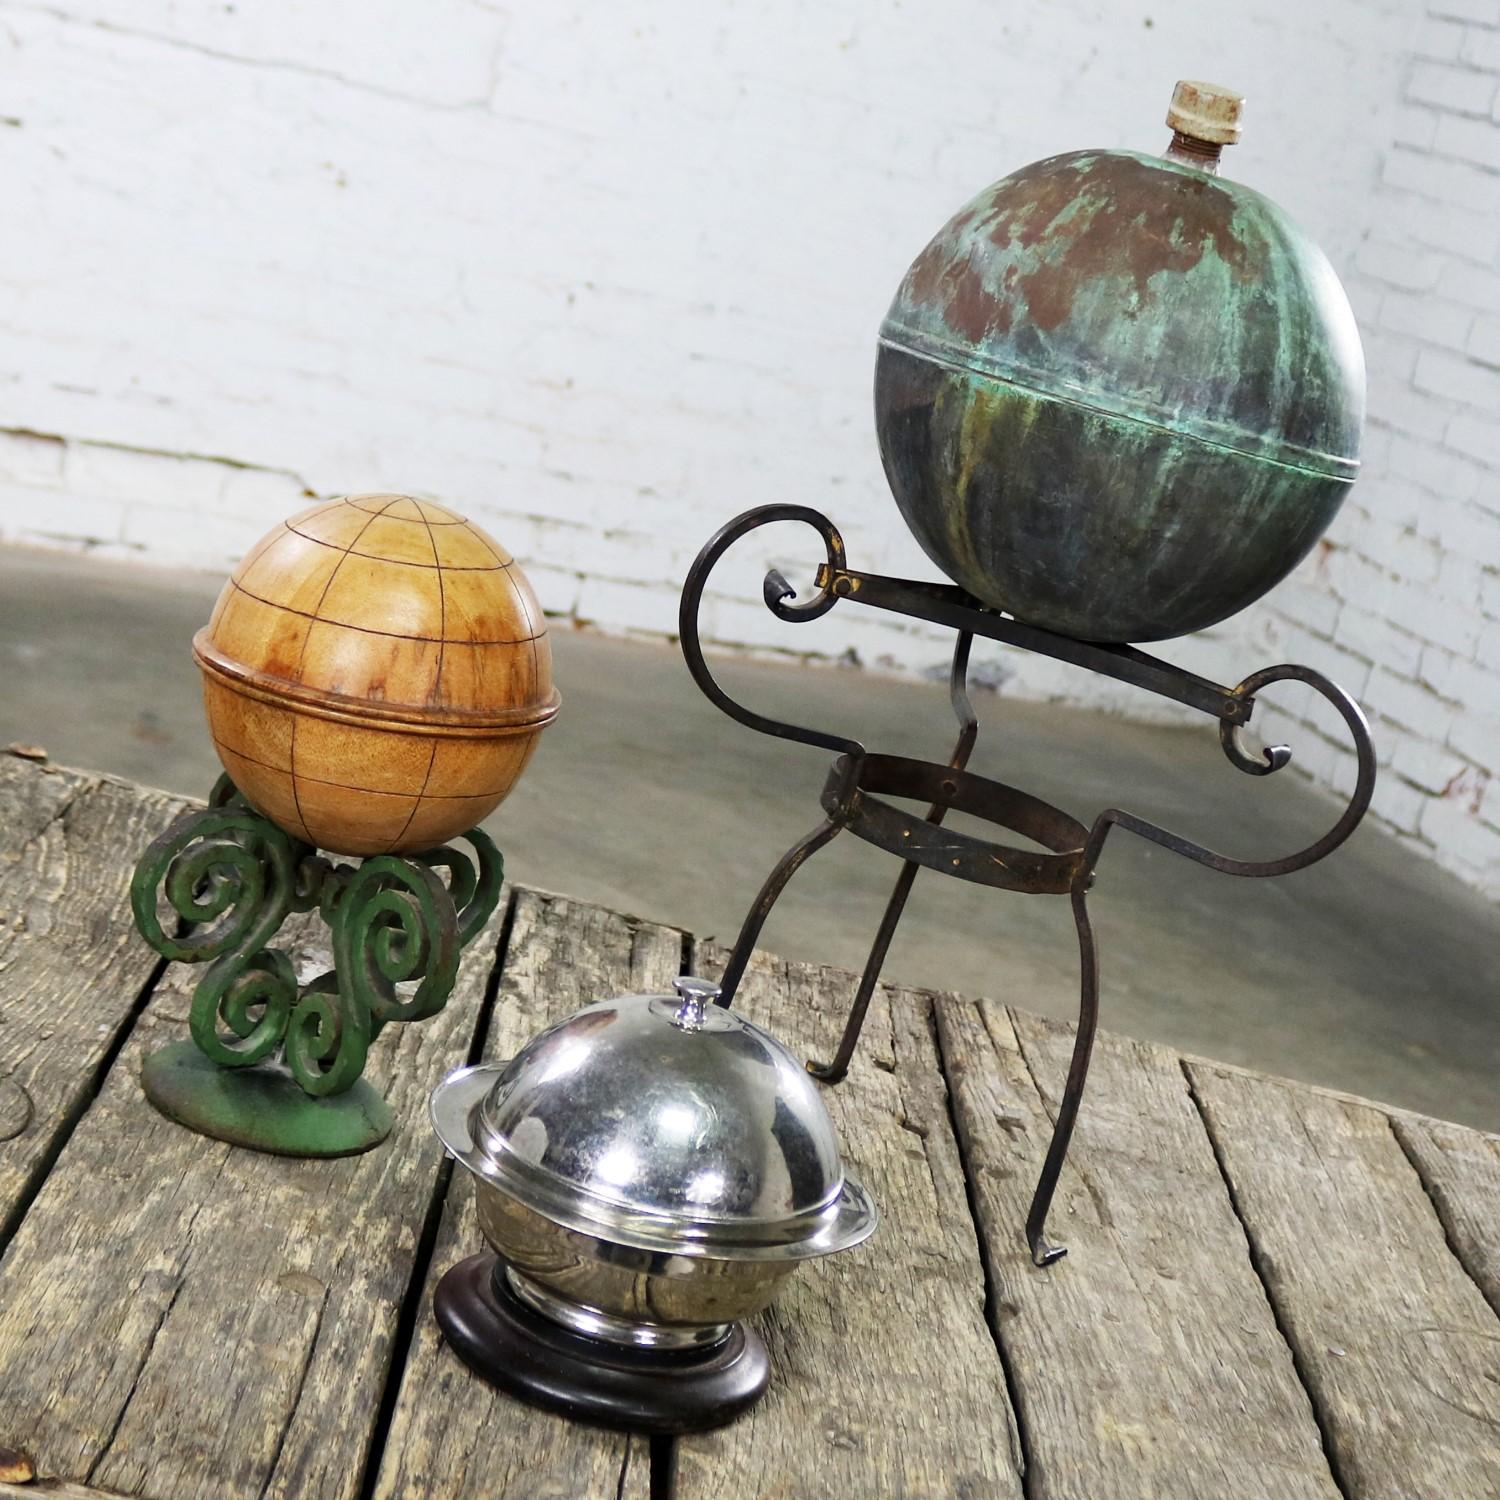 Collection of Orb Objects on Stands als Centerpiece oder Object d'Art im Angebot 3